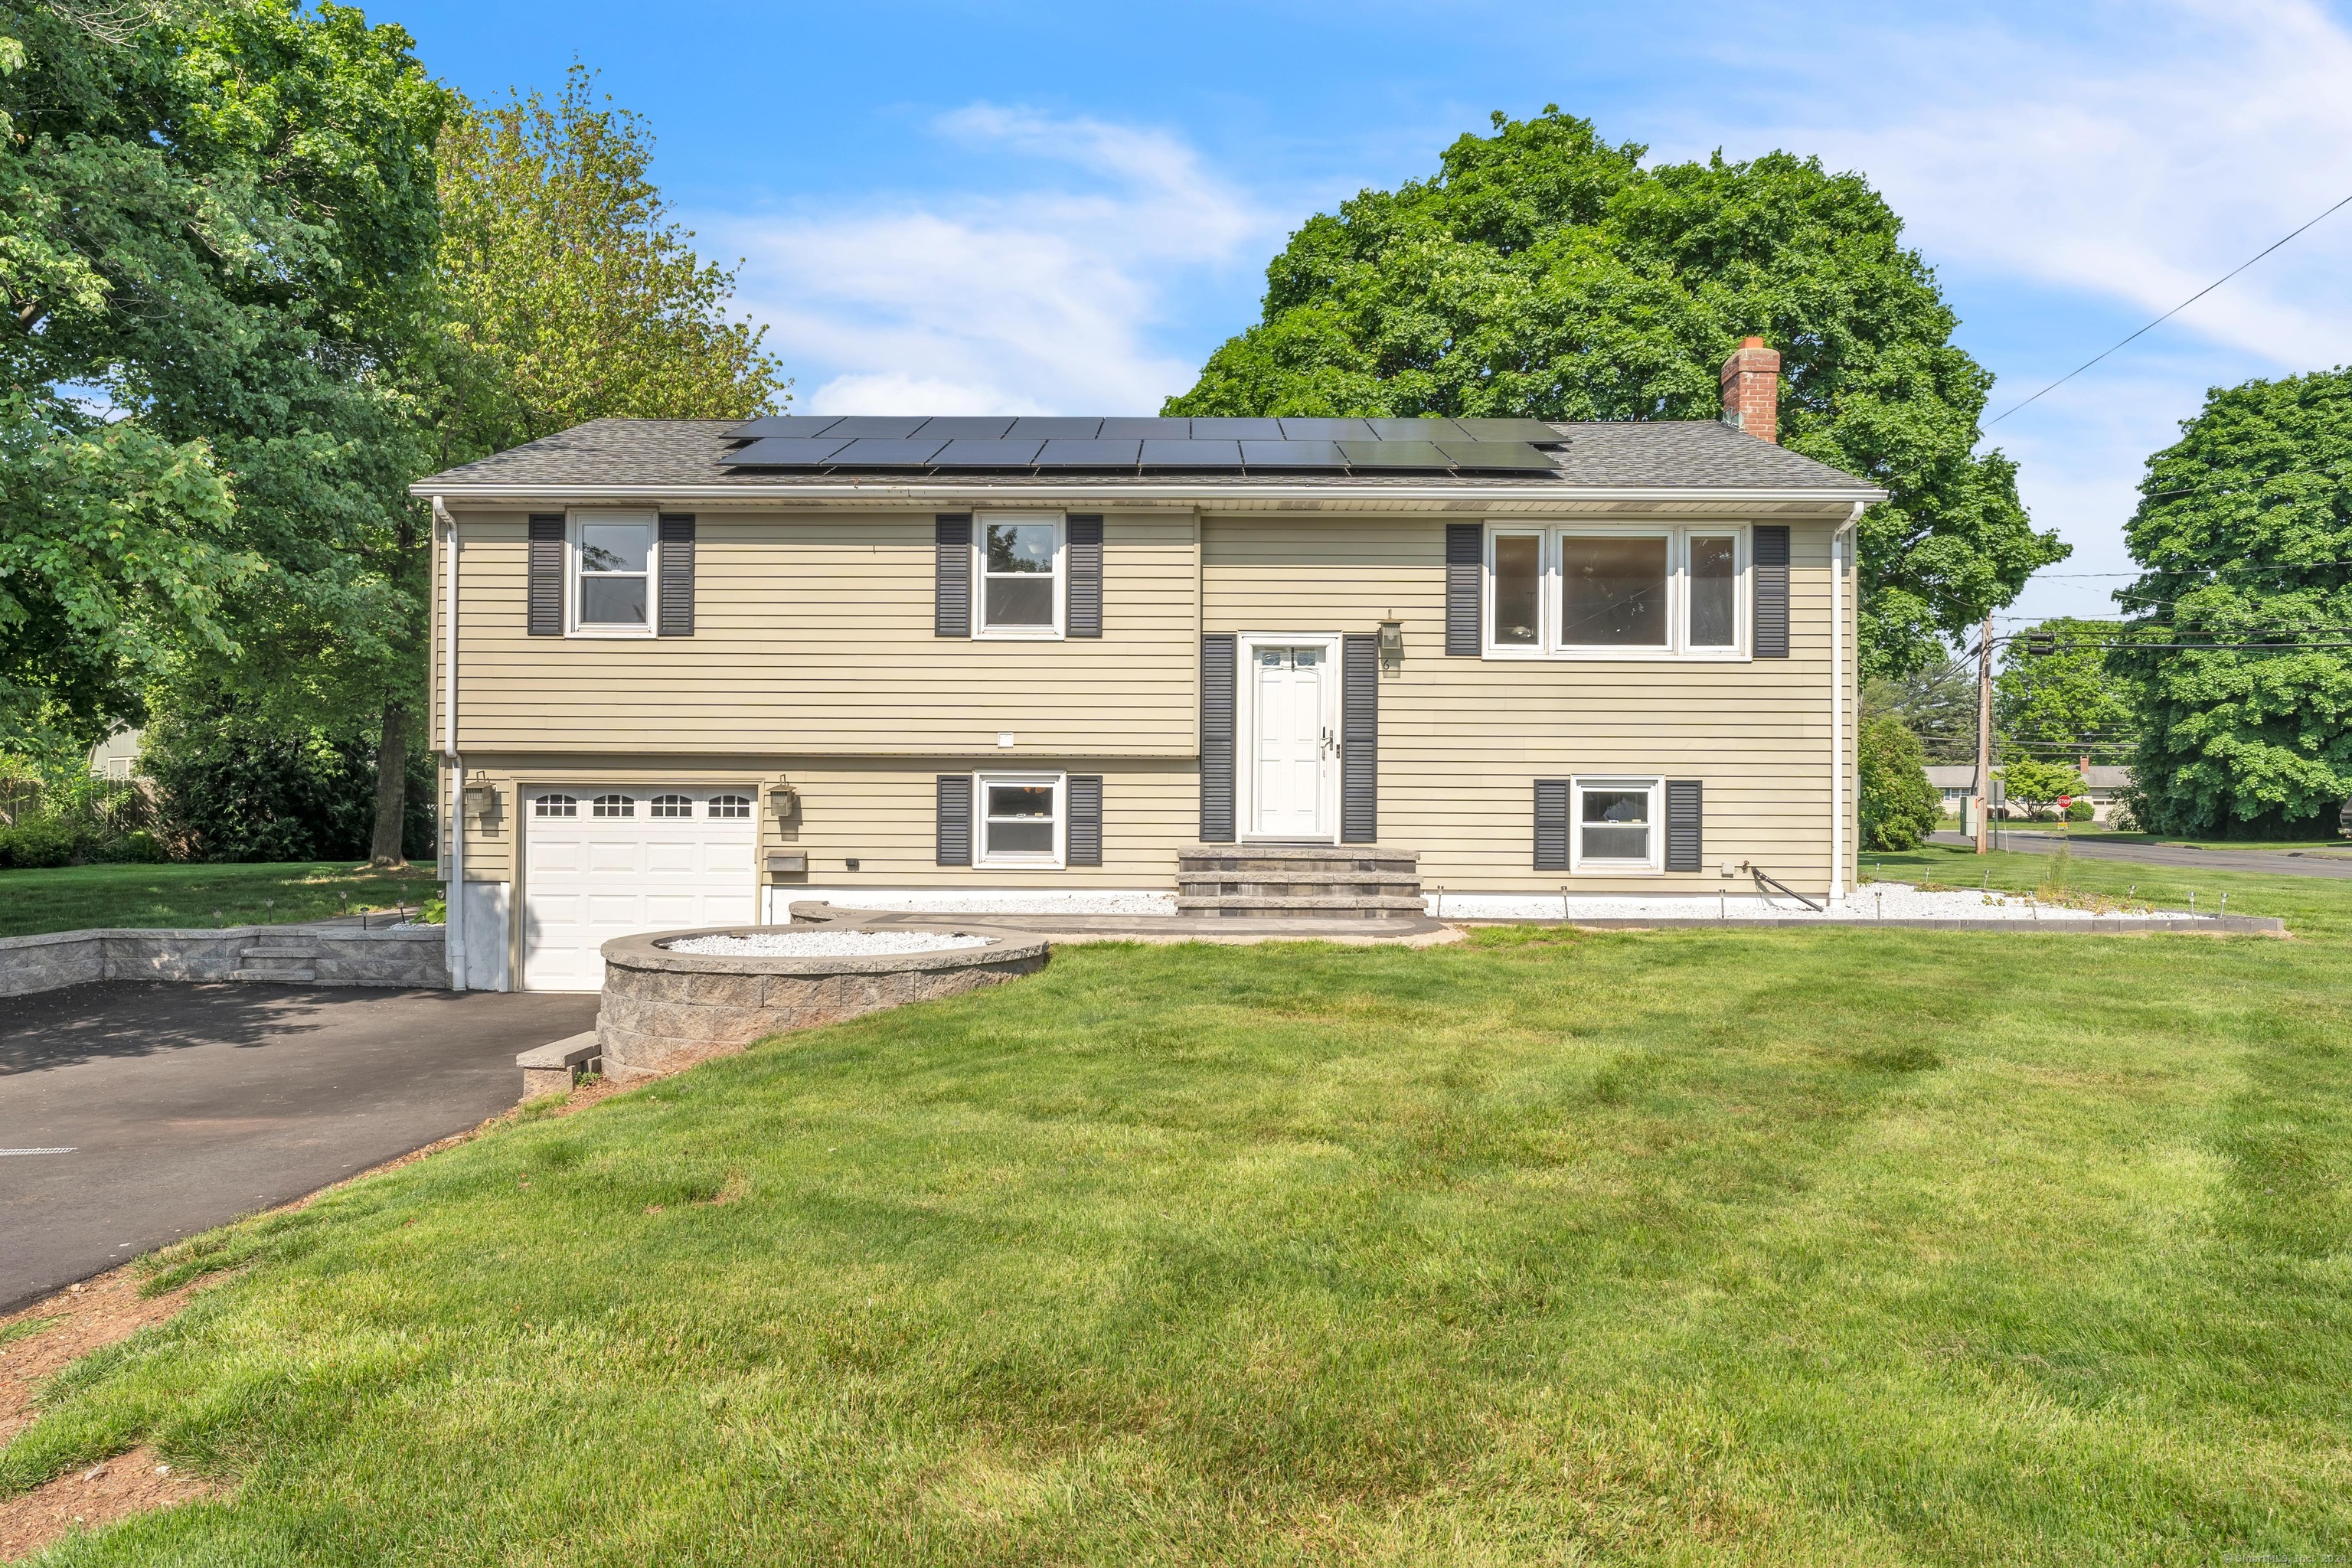 Introducing 6 Allston Rd in the beautiful town of Newington!